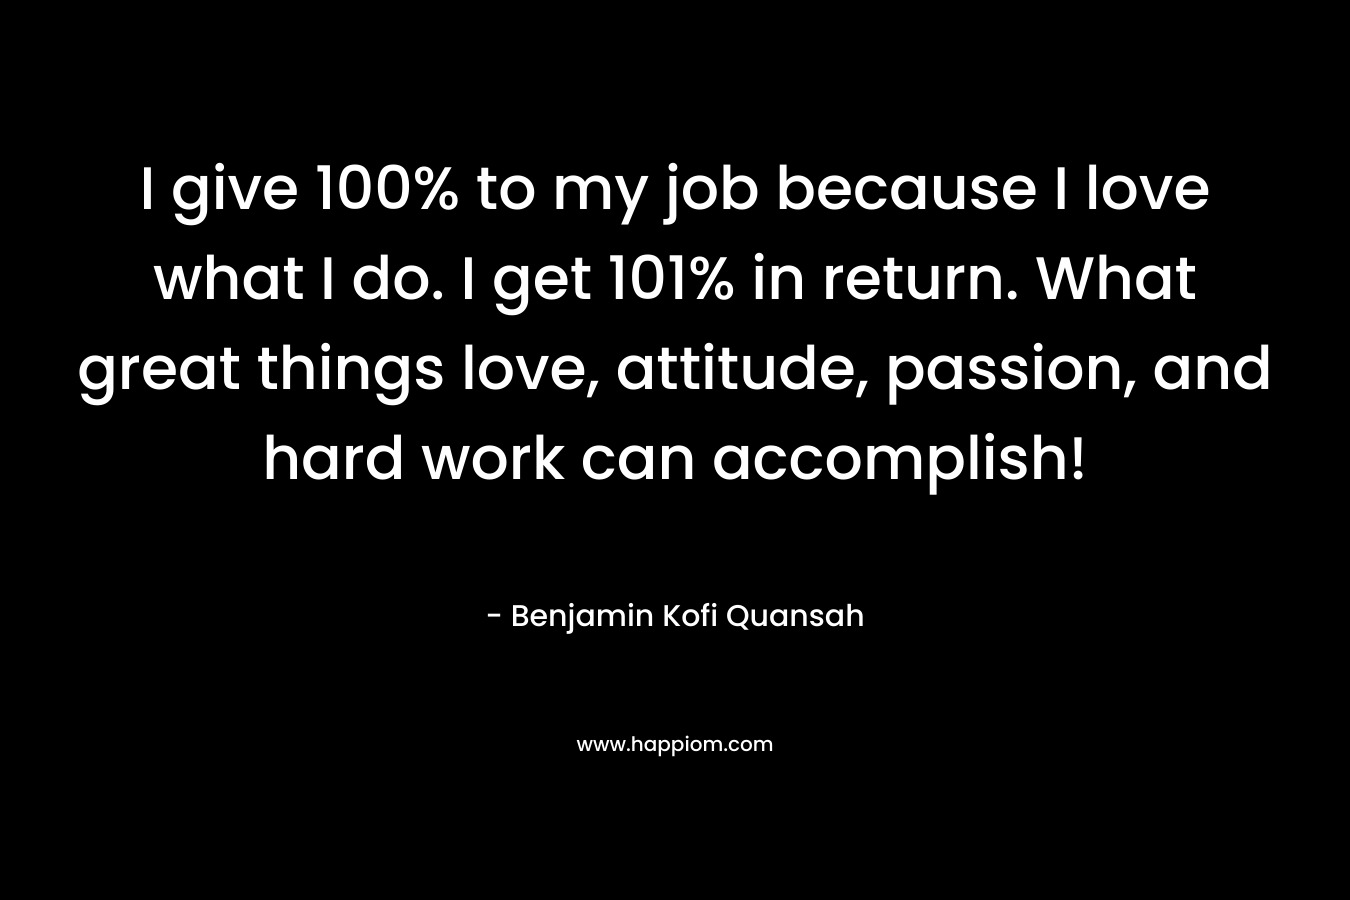 I give 100% to my job because I love what I do. I get 101% in return. What great things love, attitude, passion, and hard work can accomplish!